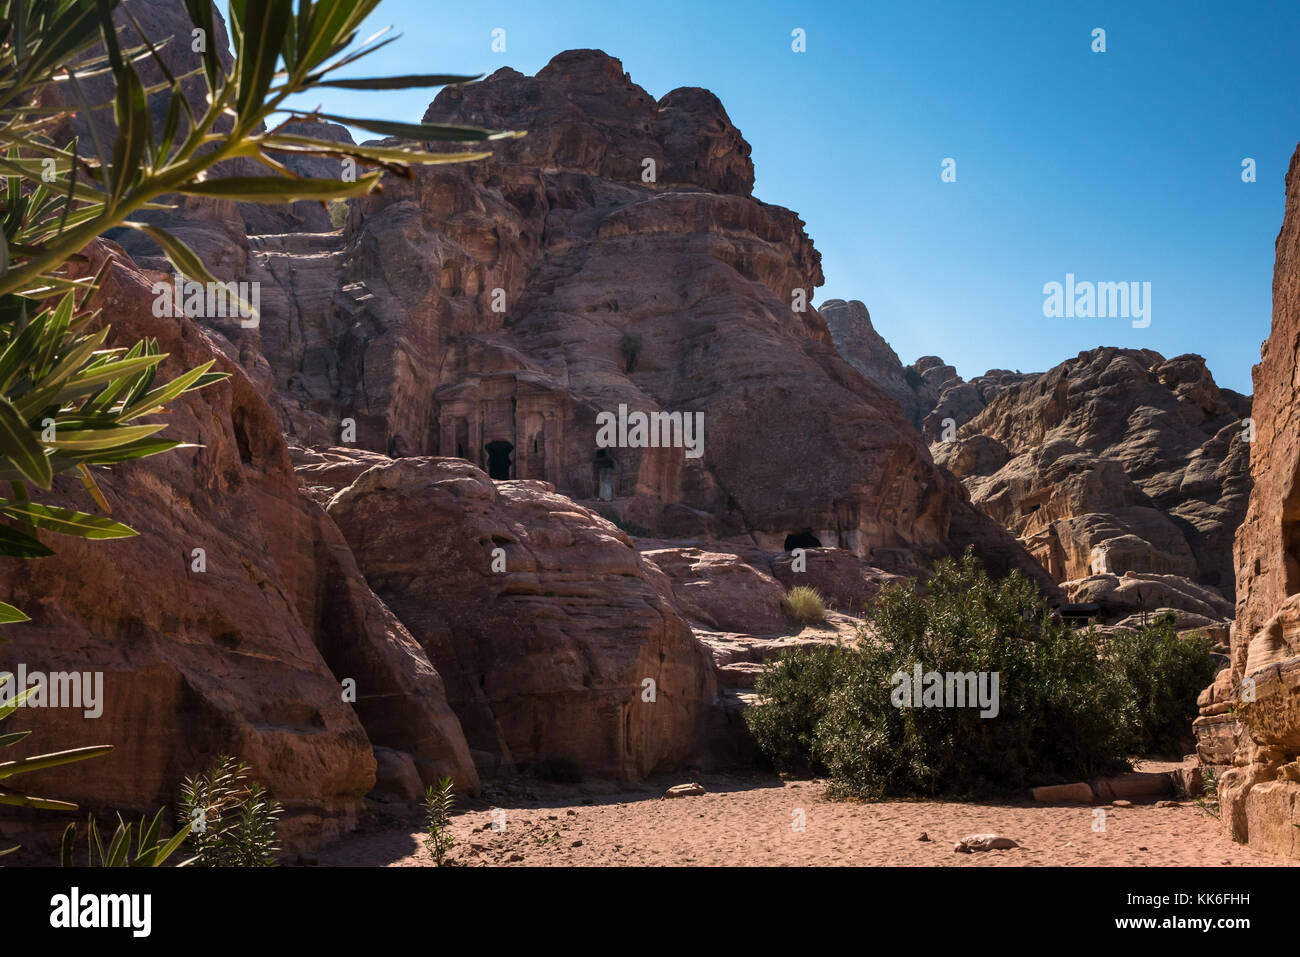 Walking route from High Place of Sacrifice through Wadi Farasa with Nabataean tombs carved into hillsides, Petra, Jordan, Middle East Stock Photo